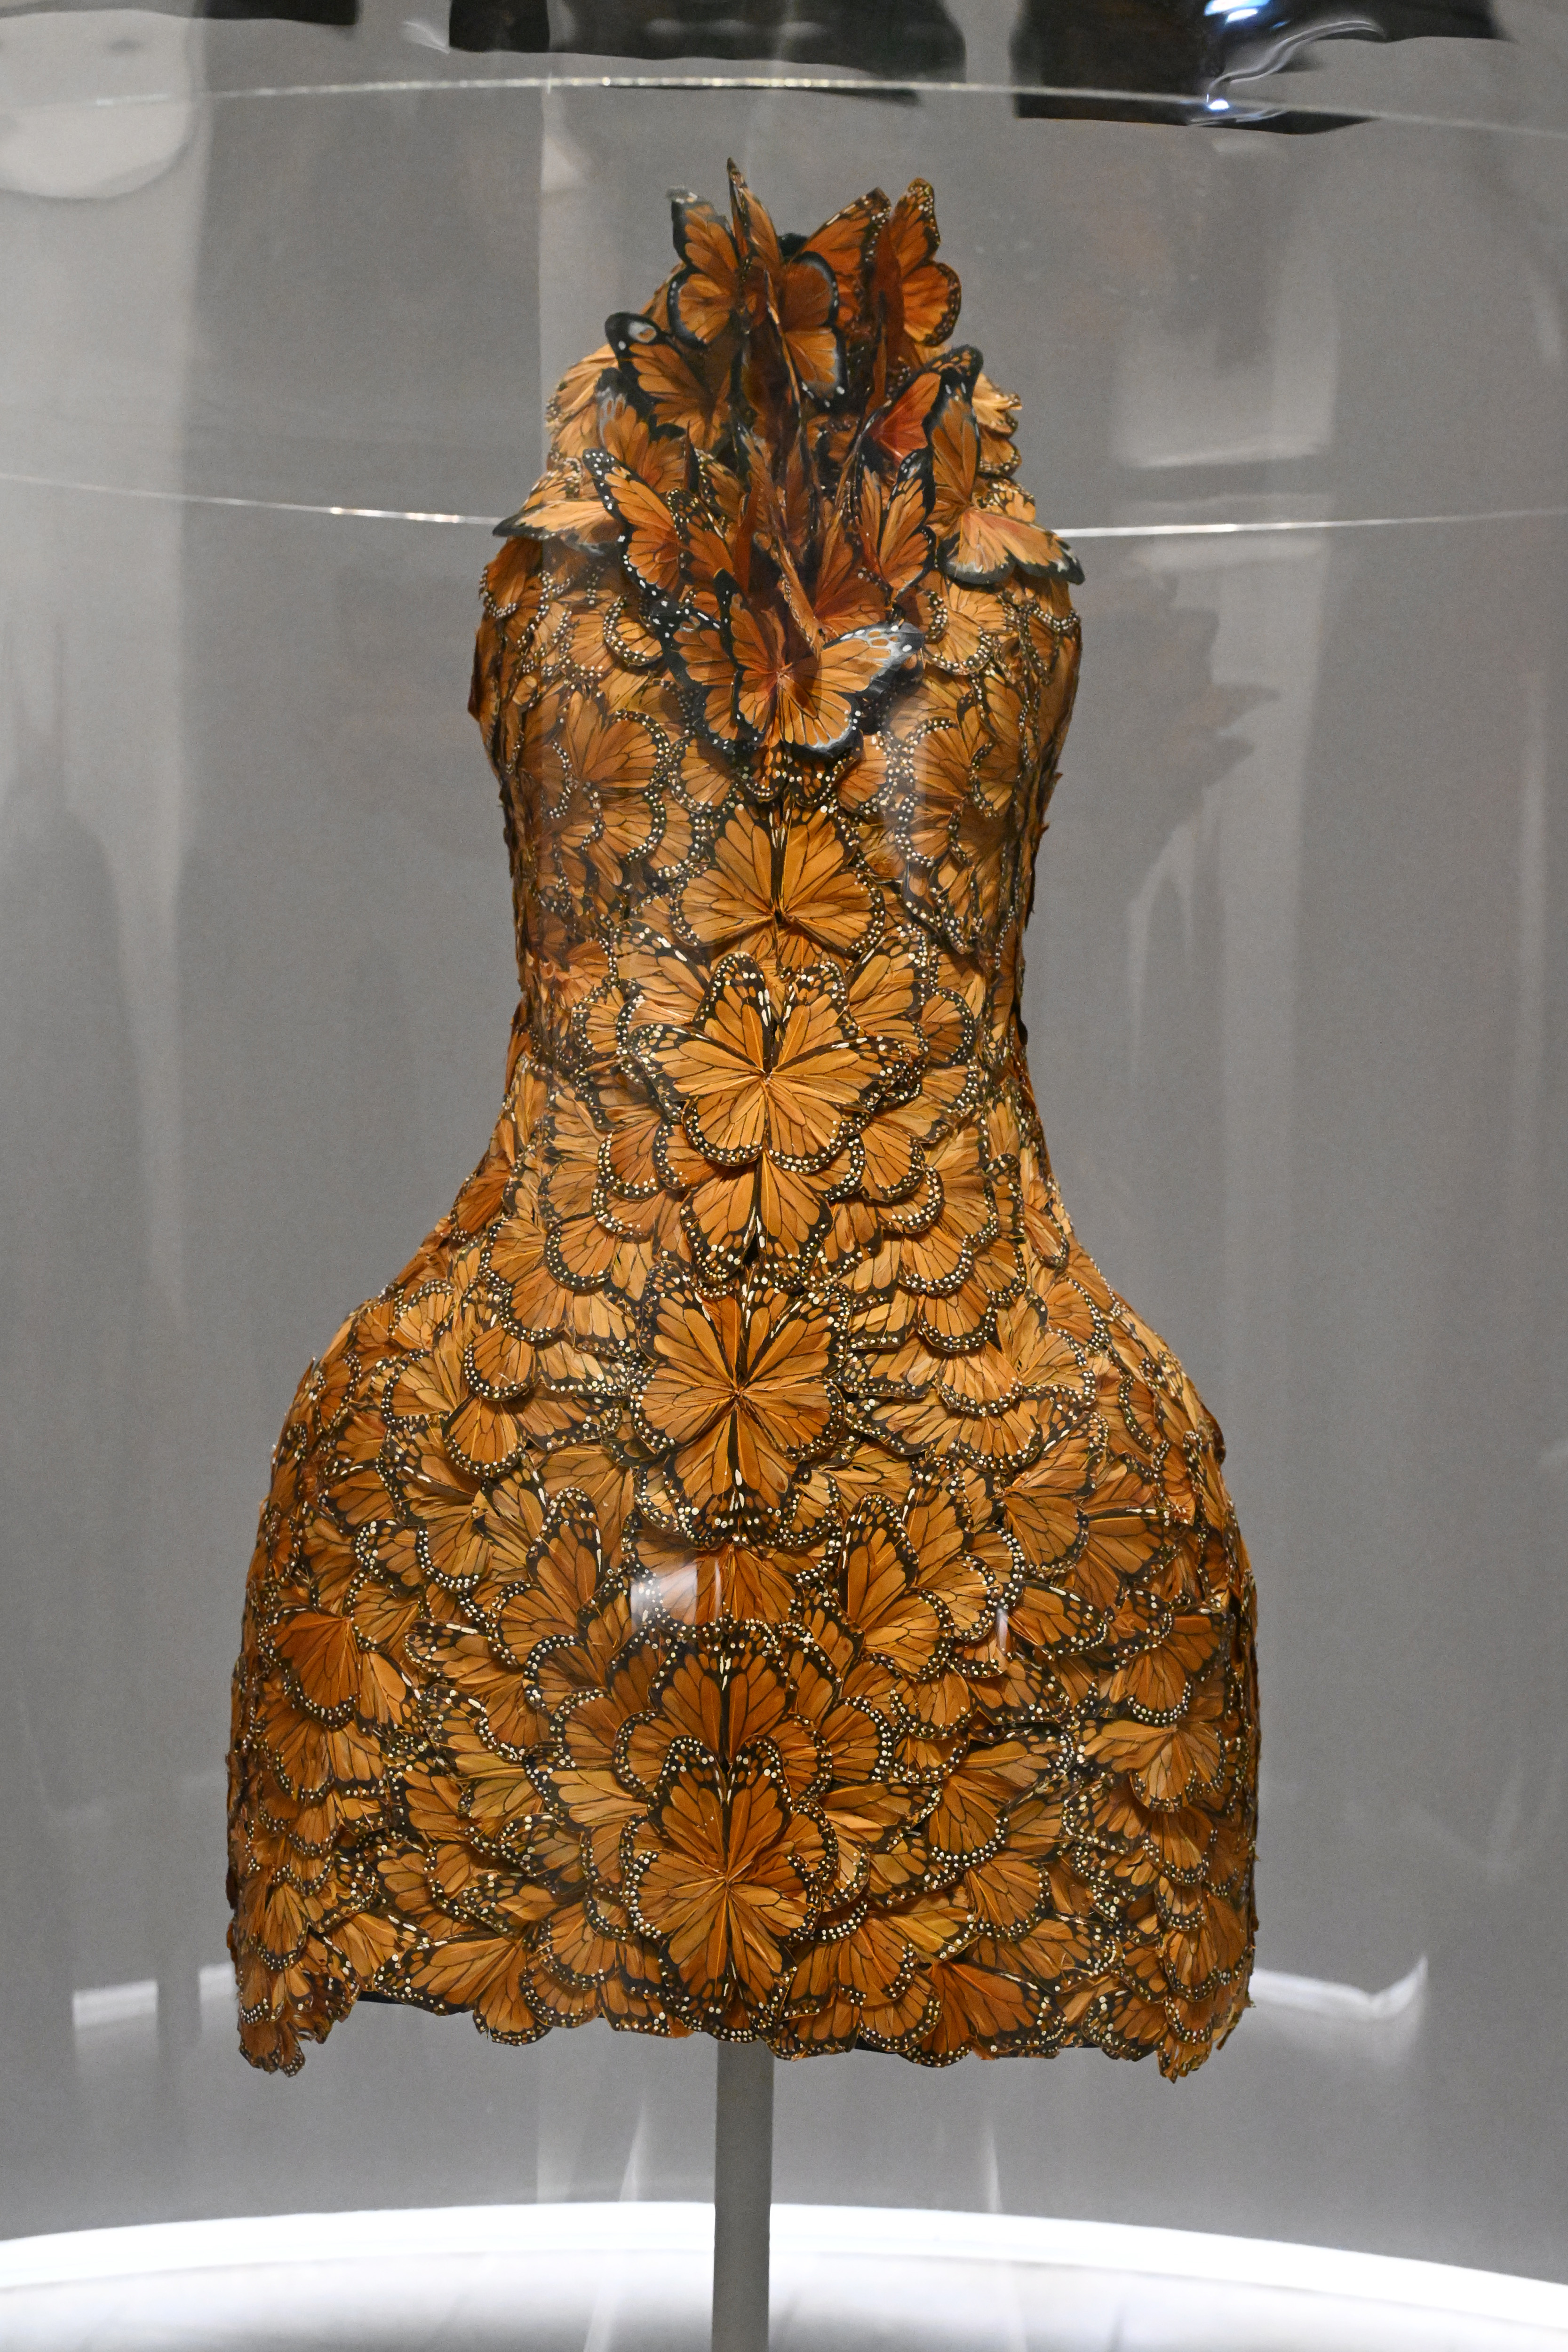 Elegant sleeveless dress on display with intricate butterfly pattern design